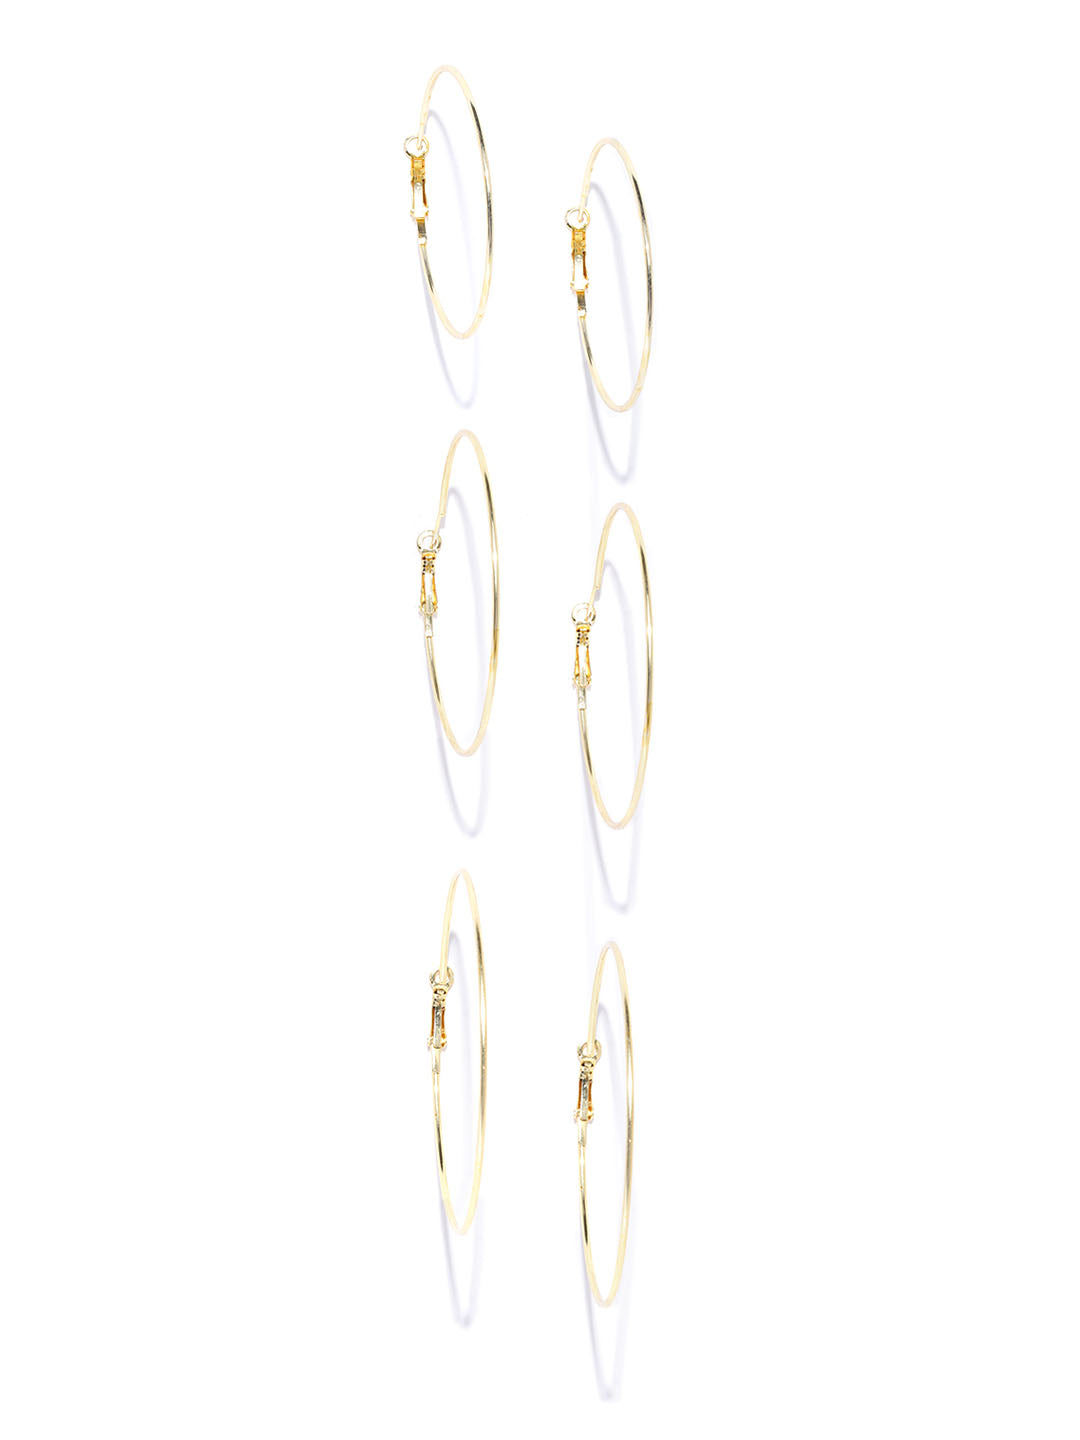 Designer Gold Plated Combo Of Three Pairs Hoop Earrings For Women And Girls